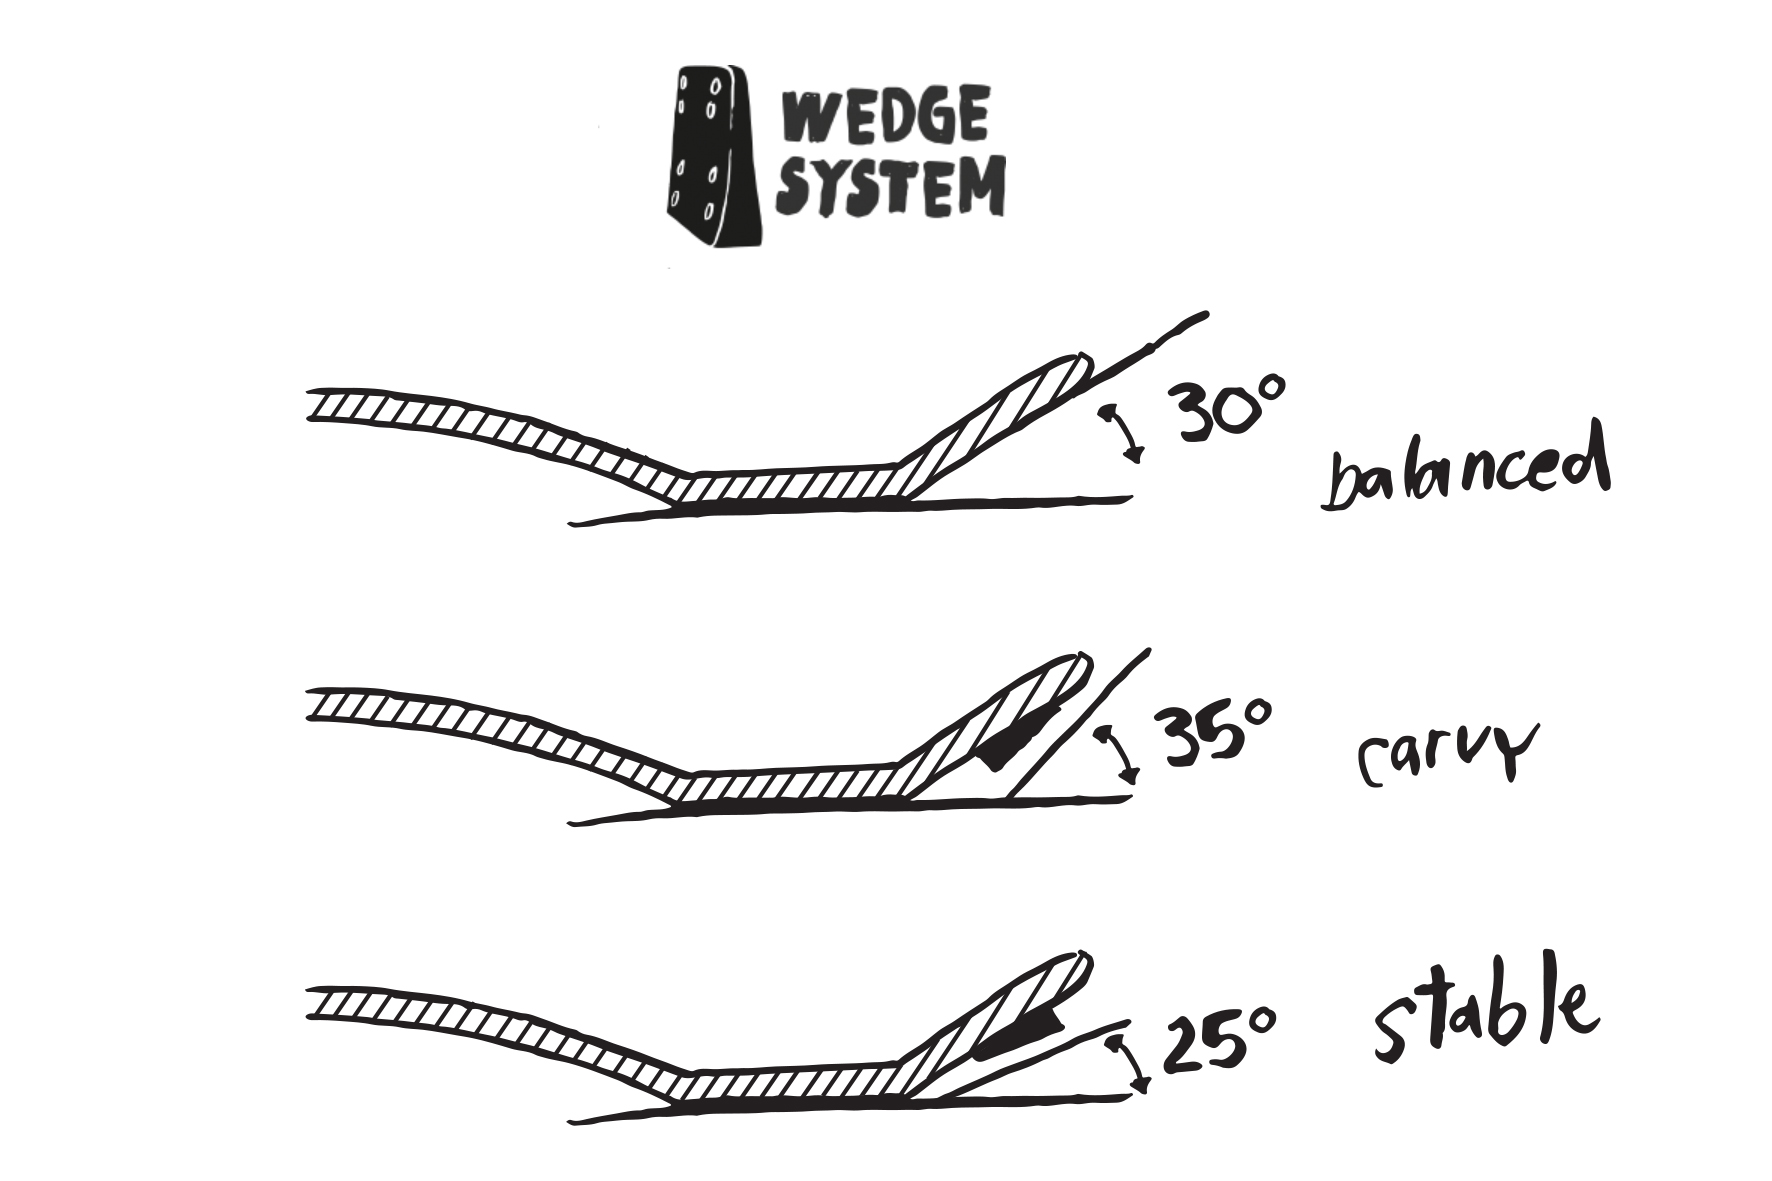 THE WEDGE SYSTEM